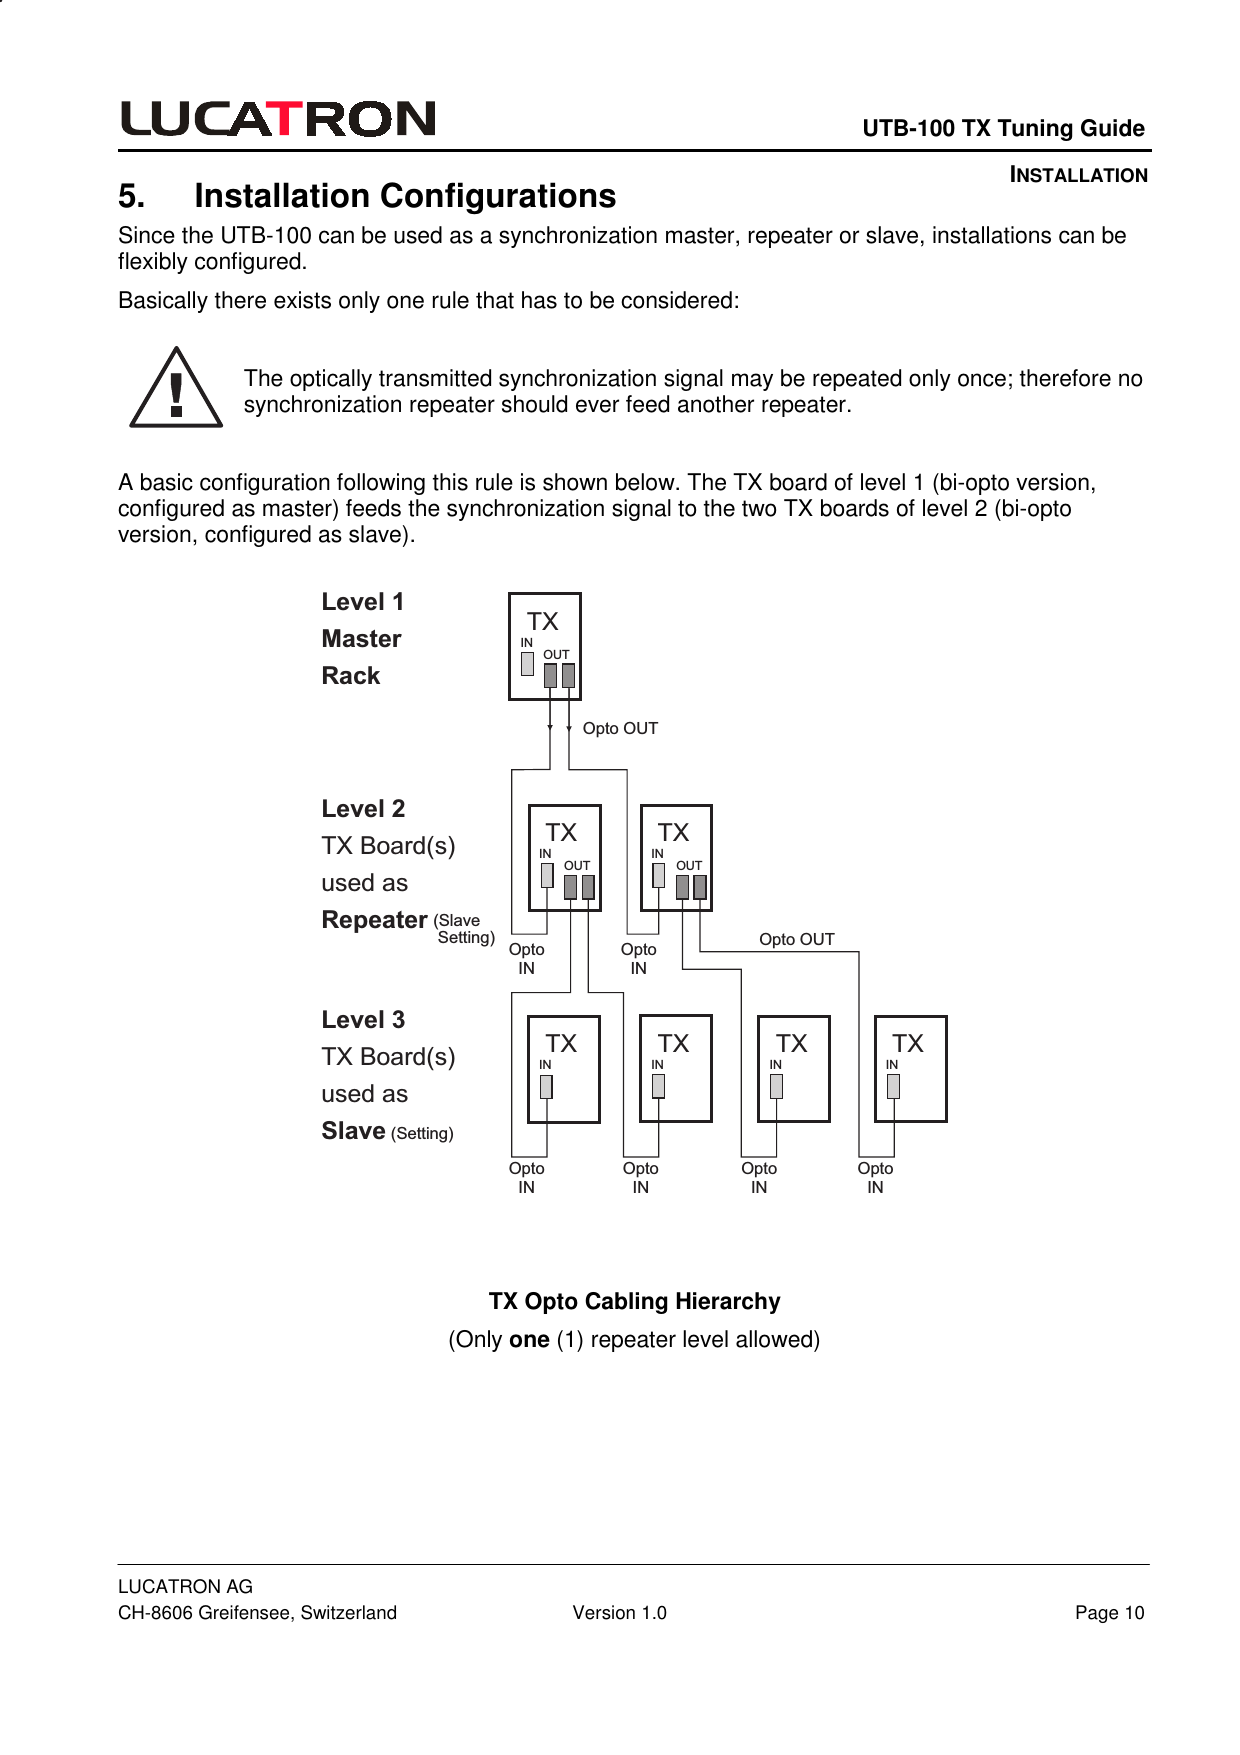    UTB-100 TX Tuning Guide LUCATRON AG CH-8606 Greifensee, Switzerland  Version 1.0  Page 10 5.  Installation Configurations  Since the UTB-100 can be used as a synchronization master, repeater or slave, installations can be flexibly configured.  Basically there exists only one rule that has to be considered:   The optically transmitted synchronization signal may be repeated only once; therefore no synchronization repeater should ever feed another repeater.   A basic configuration following this rule is shown below. The TX board of level 1 (bi-opto version, configured as master) feeds the synchronization signal to the two TX boards of level 2 (bi-opto version, configured as slave).  Level 1MasterRackLevel 3SlaveTX Board(s)used as(Setting)Level 2RepeaterTX Board(s)used as(SlaveSetting)TXINOUTTXINOUTTXINTXINTXINTXINOptoINOptoINOptoINOptoINOptoINOptoINOpto OUTOpto OUTTXINOUT   TX Opto Cabling Hierarchy (Only one (1) repeater level allowed)    INSTALLATION